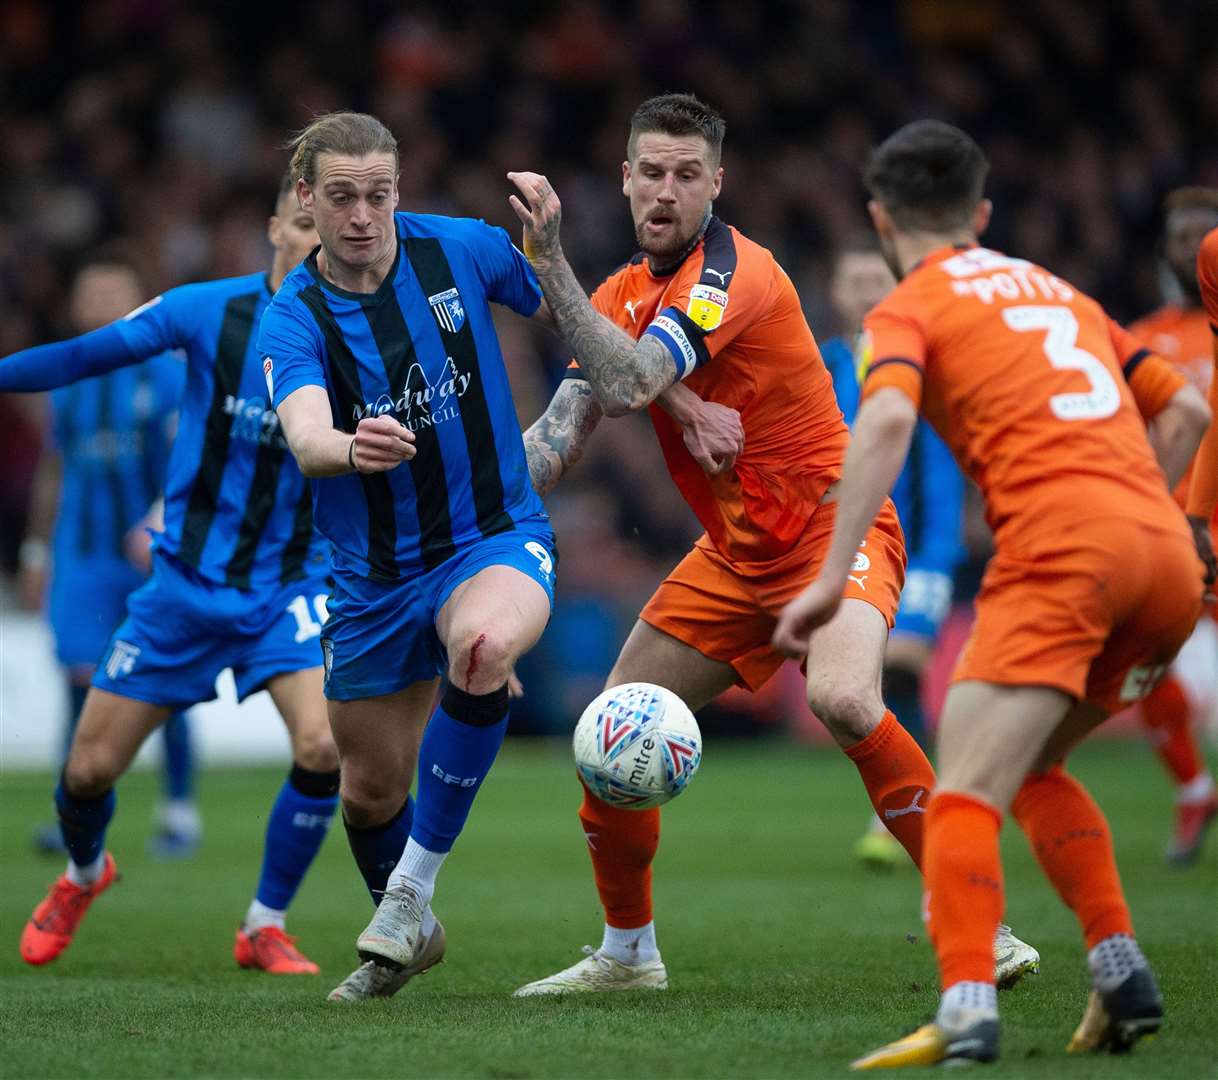 Tom Eaves has been released by Hull City who he helped to promotion from League 1 after leaving Gillingham